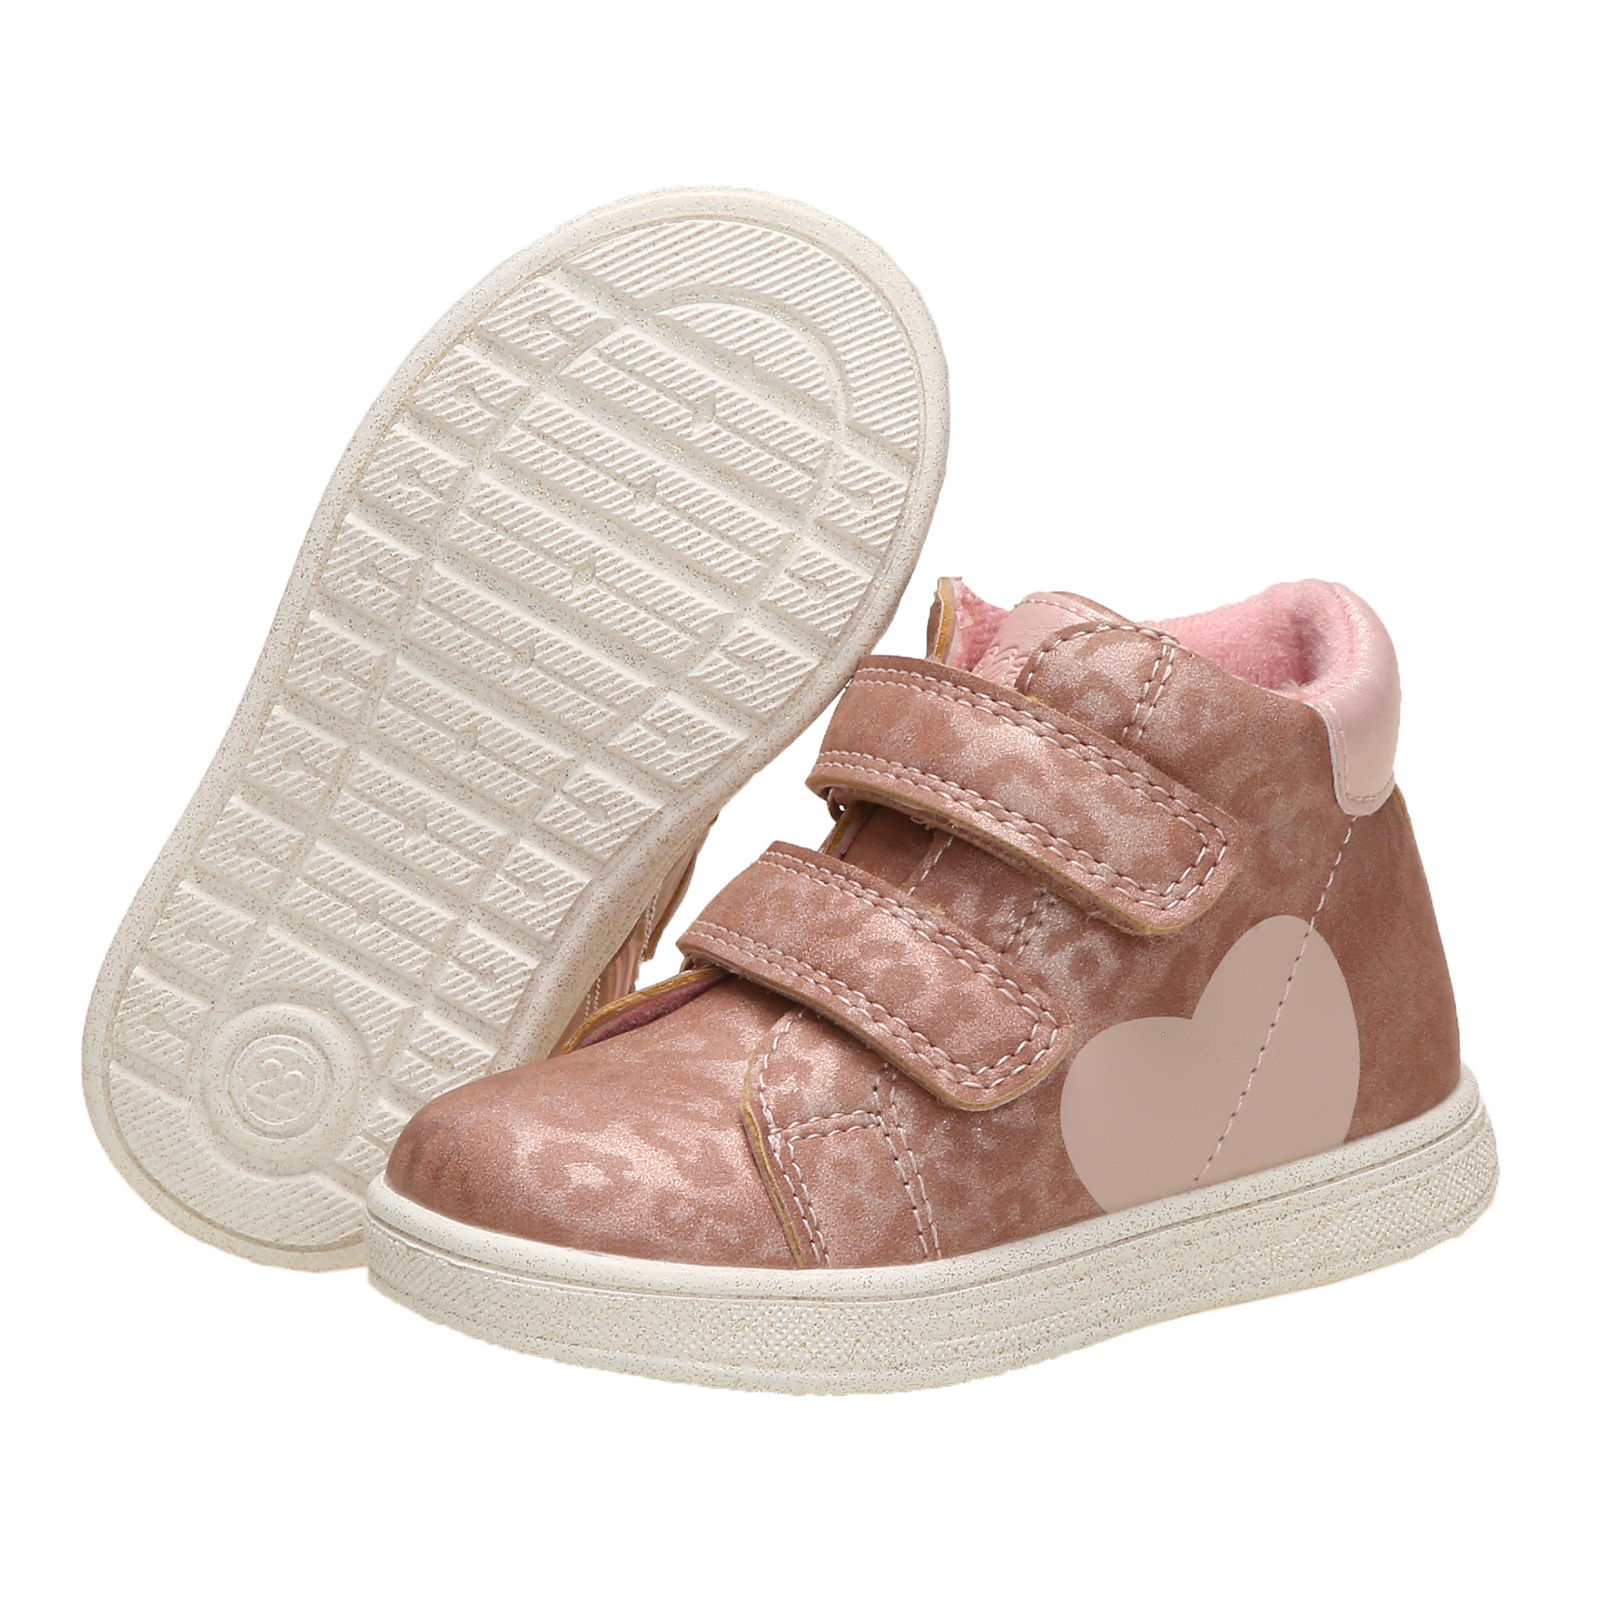 Toddler-Sports-Shoes-Children-S-Casual-Shoes-Girls-Non-Slip-Running-Shoes-Autumn-And-Winter-Warm-1